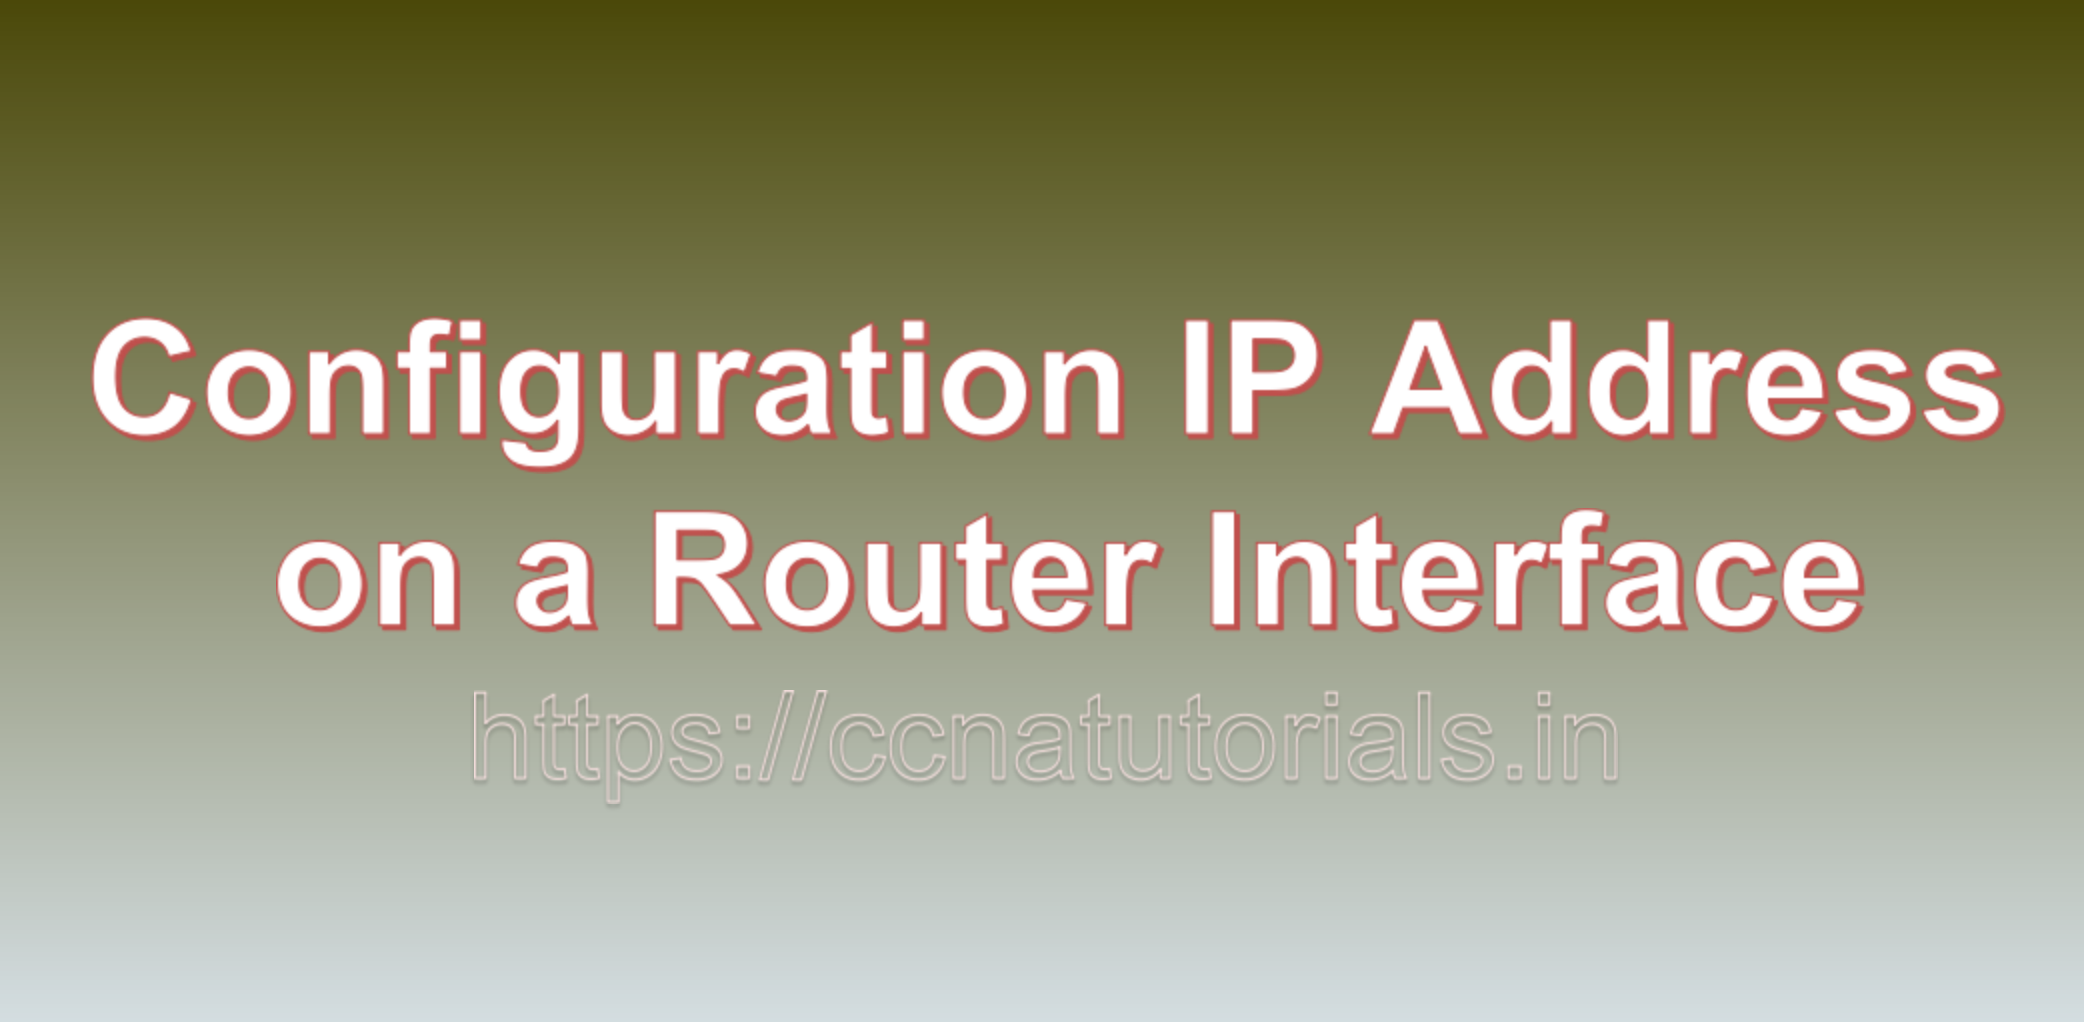 Configuration of an IP Address on a Router Interface, ccna, ccna tutorials